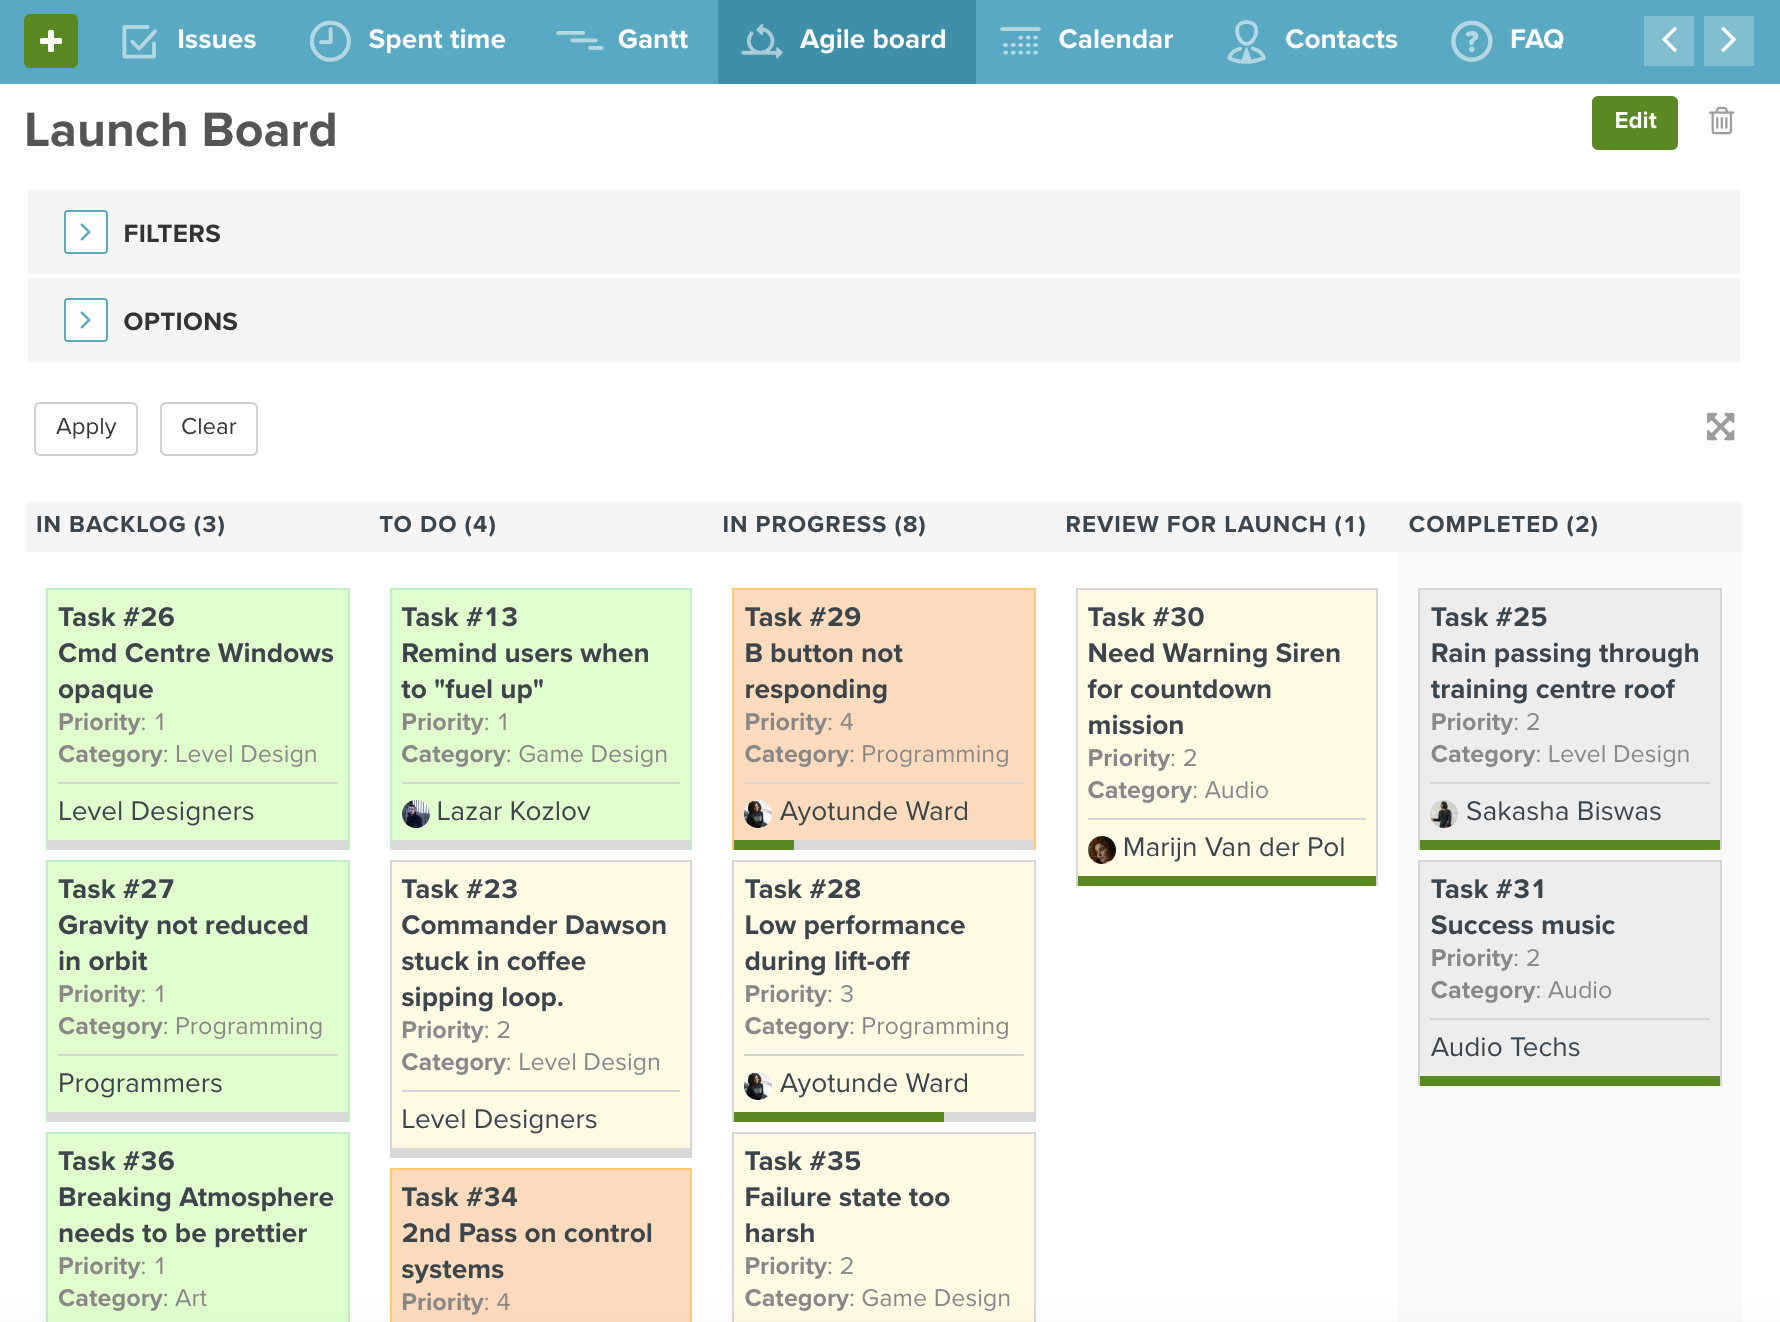 Agile board with time spent and priority colors